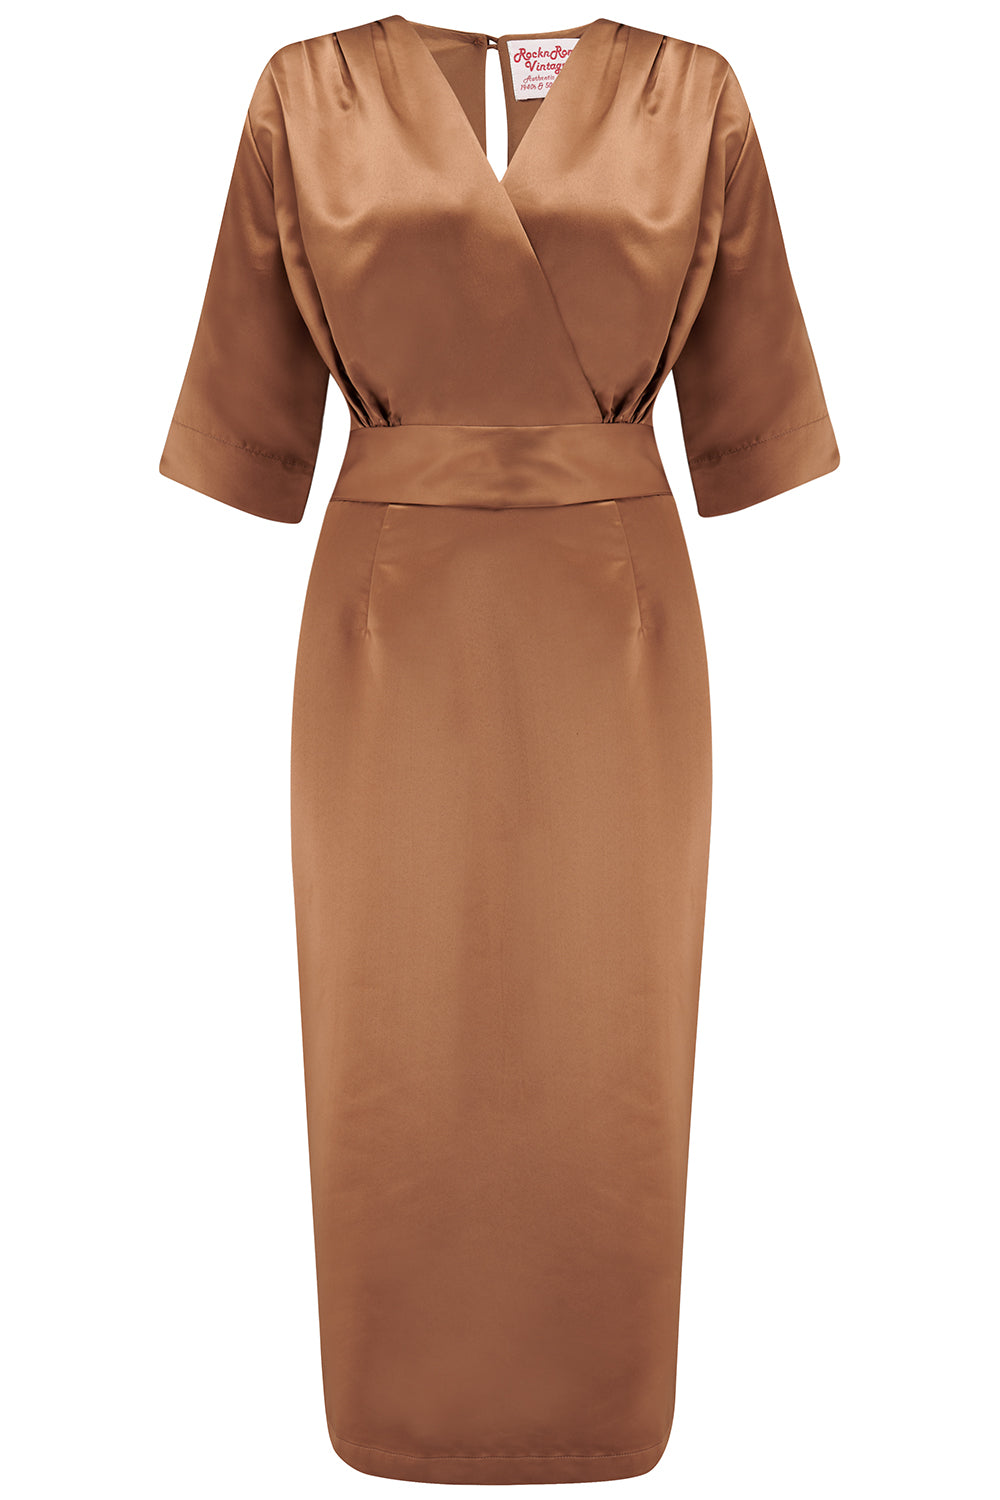 RnR "Luxe" Range.. The “Evelyn" Wiggle Dress in Super Luxurious Golden Pecan Brown SATIN